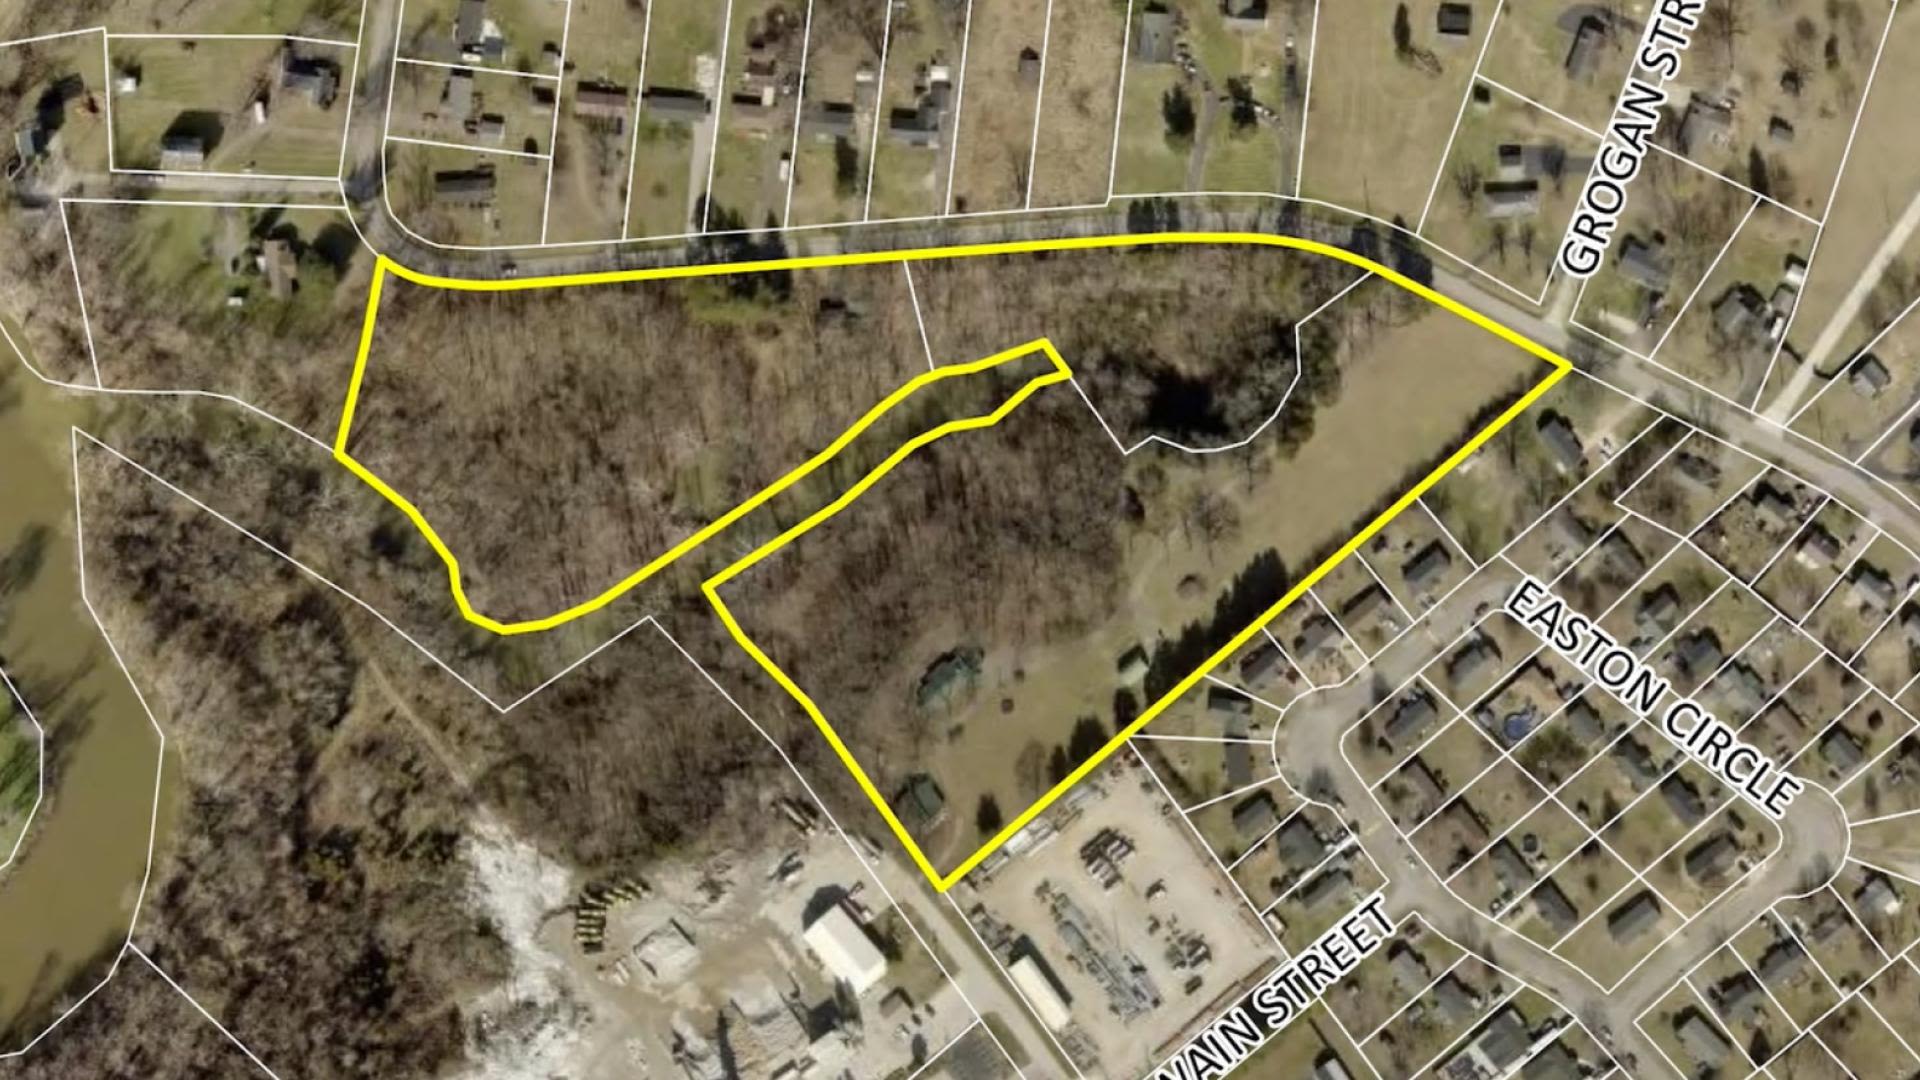 RV Park proposed for Plum Springs, developers and community respond - WNKY News 40 Television